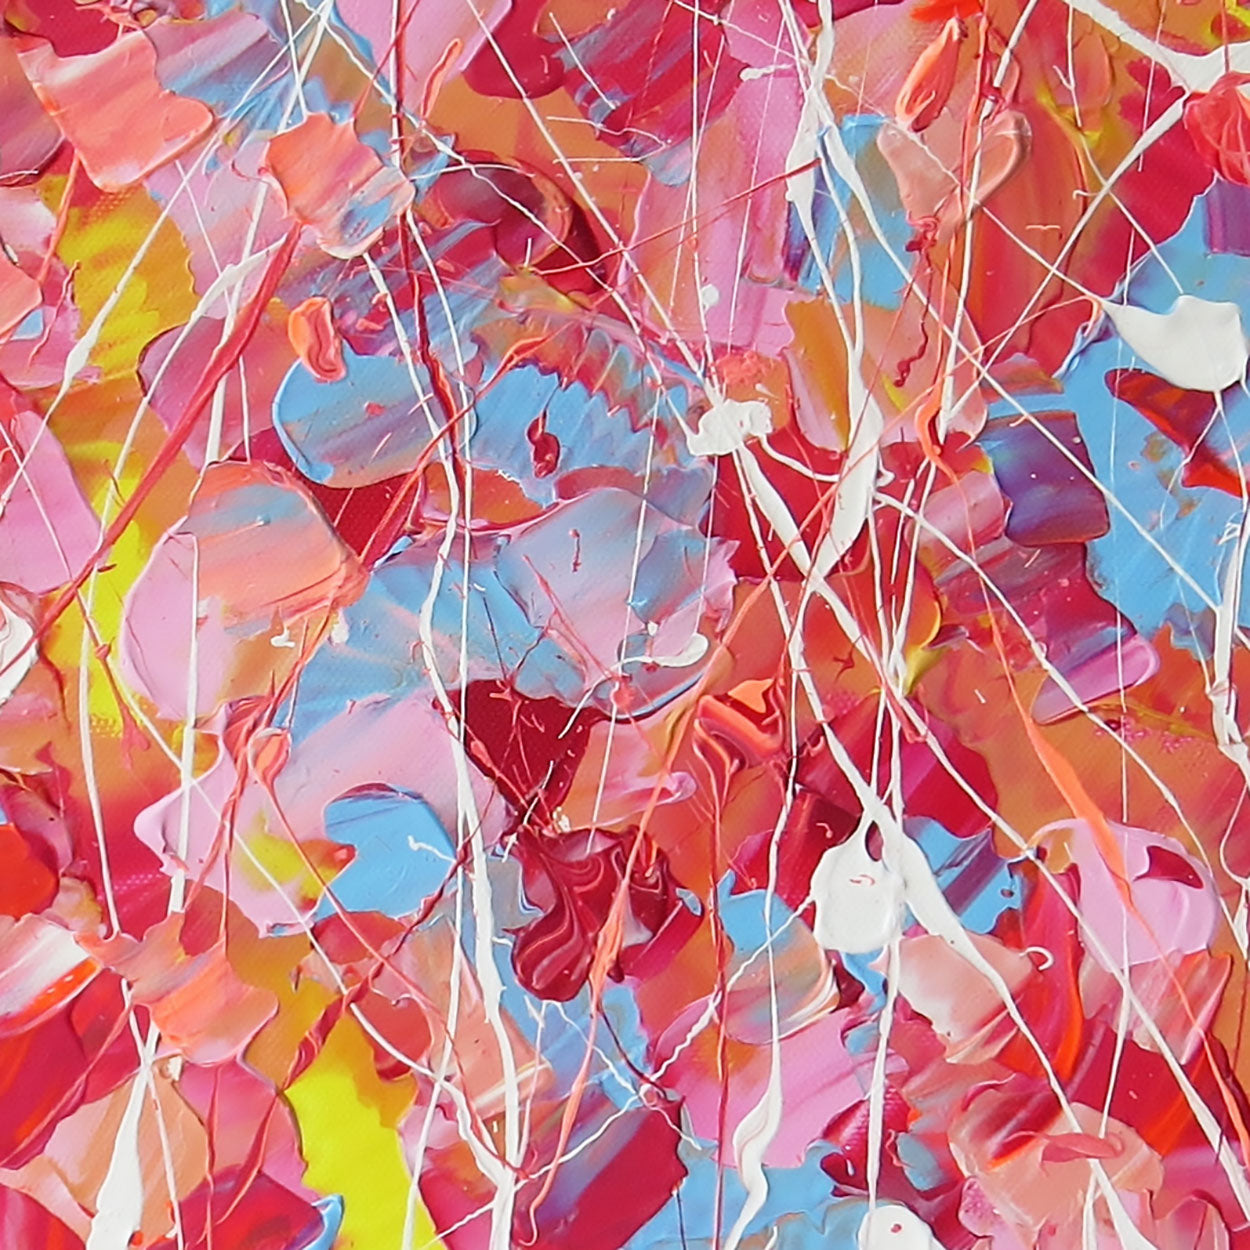 Closeup of 'Pink Lake' Textured Abstract Original Painting in yellow, nude, sky blue, reds and pinks. Art by Bridget Bradley